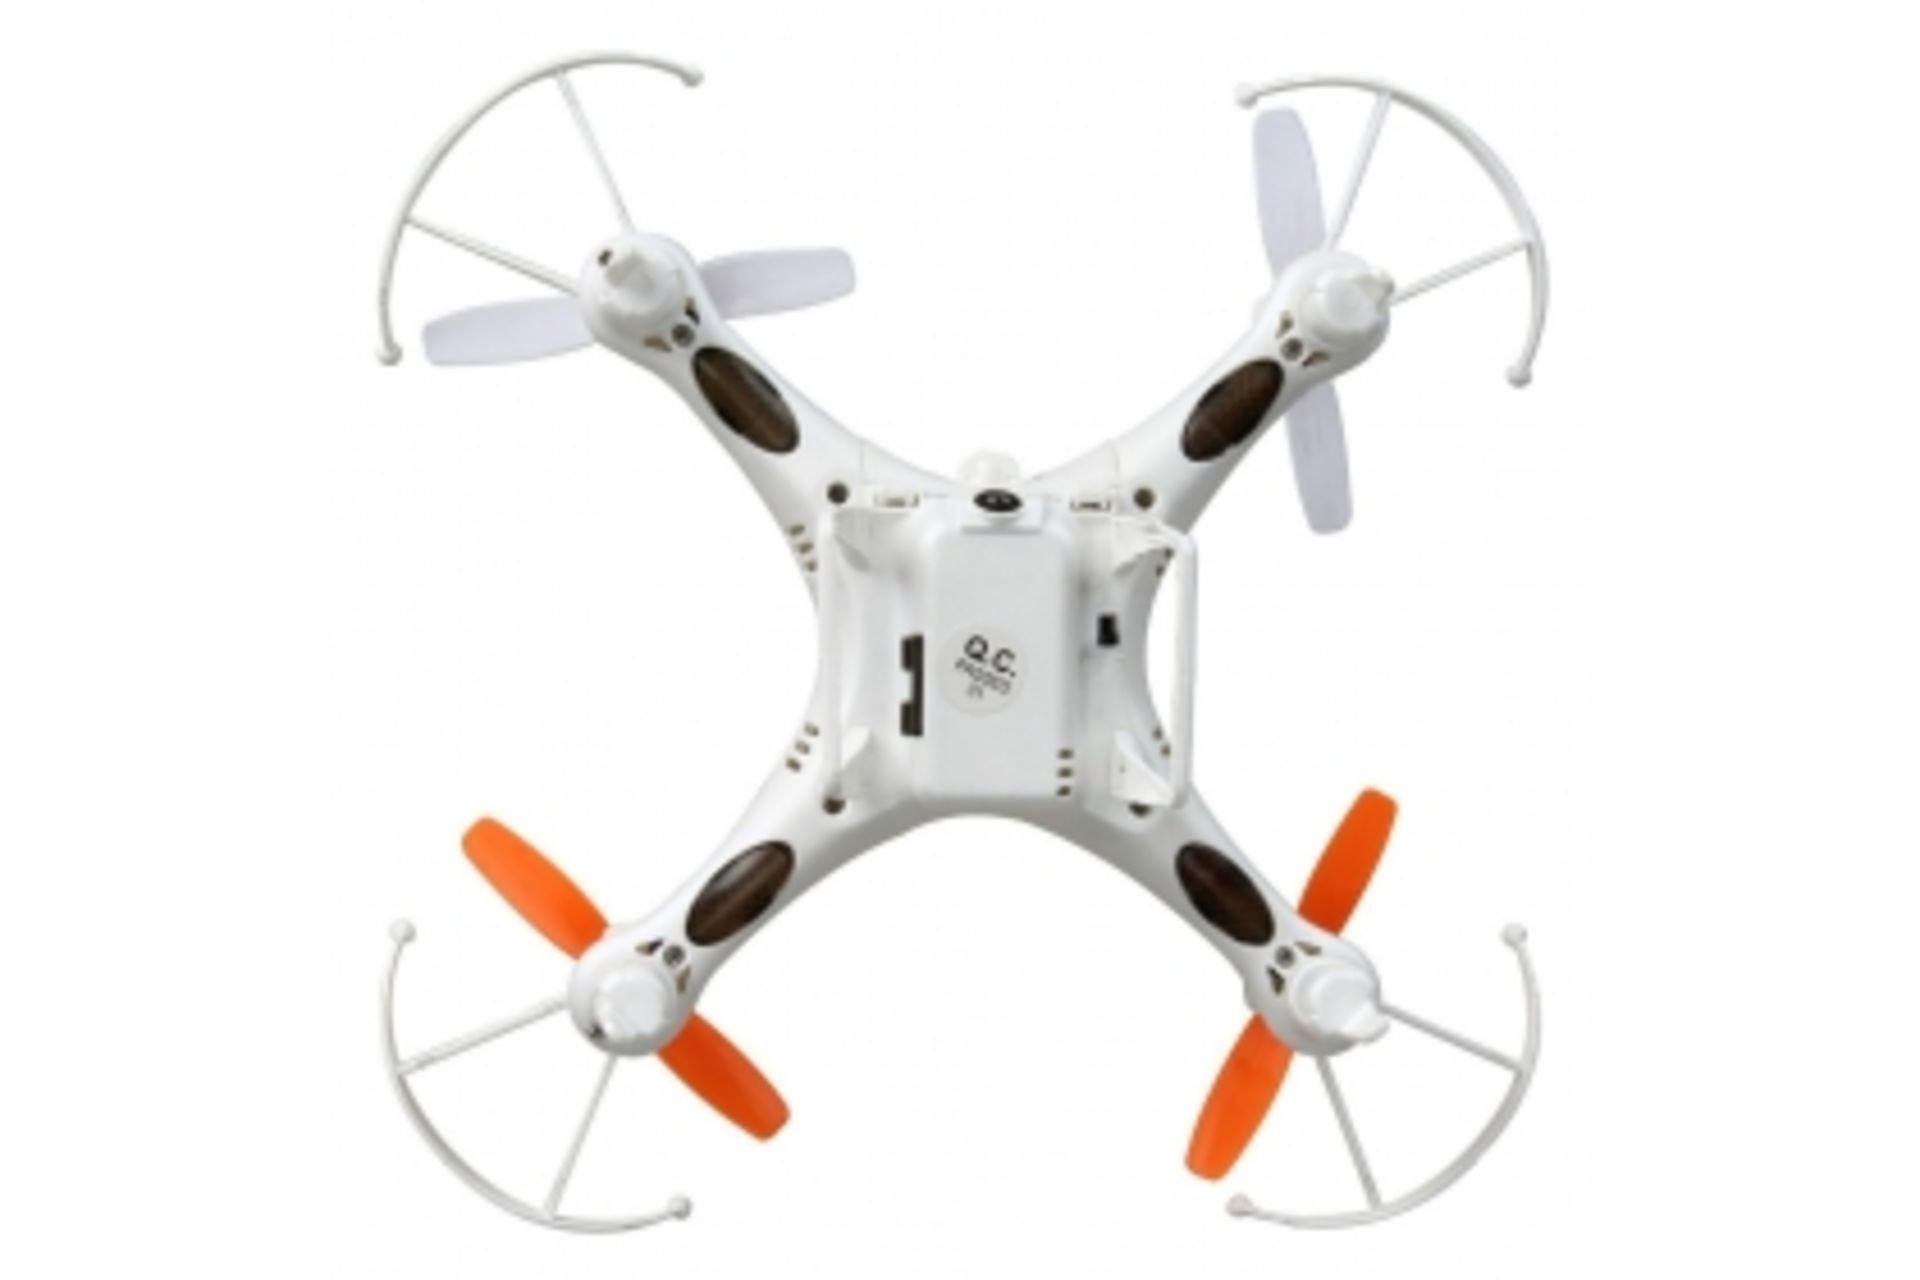 V Brand New Skytech M62 Quadcopter Without Camera RRP £29.99 ISP £29.99 (Ebay) X 4 Bid price to be